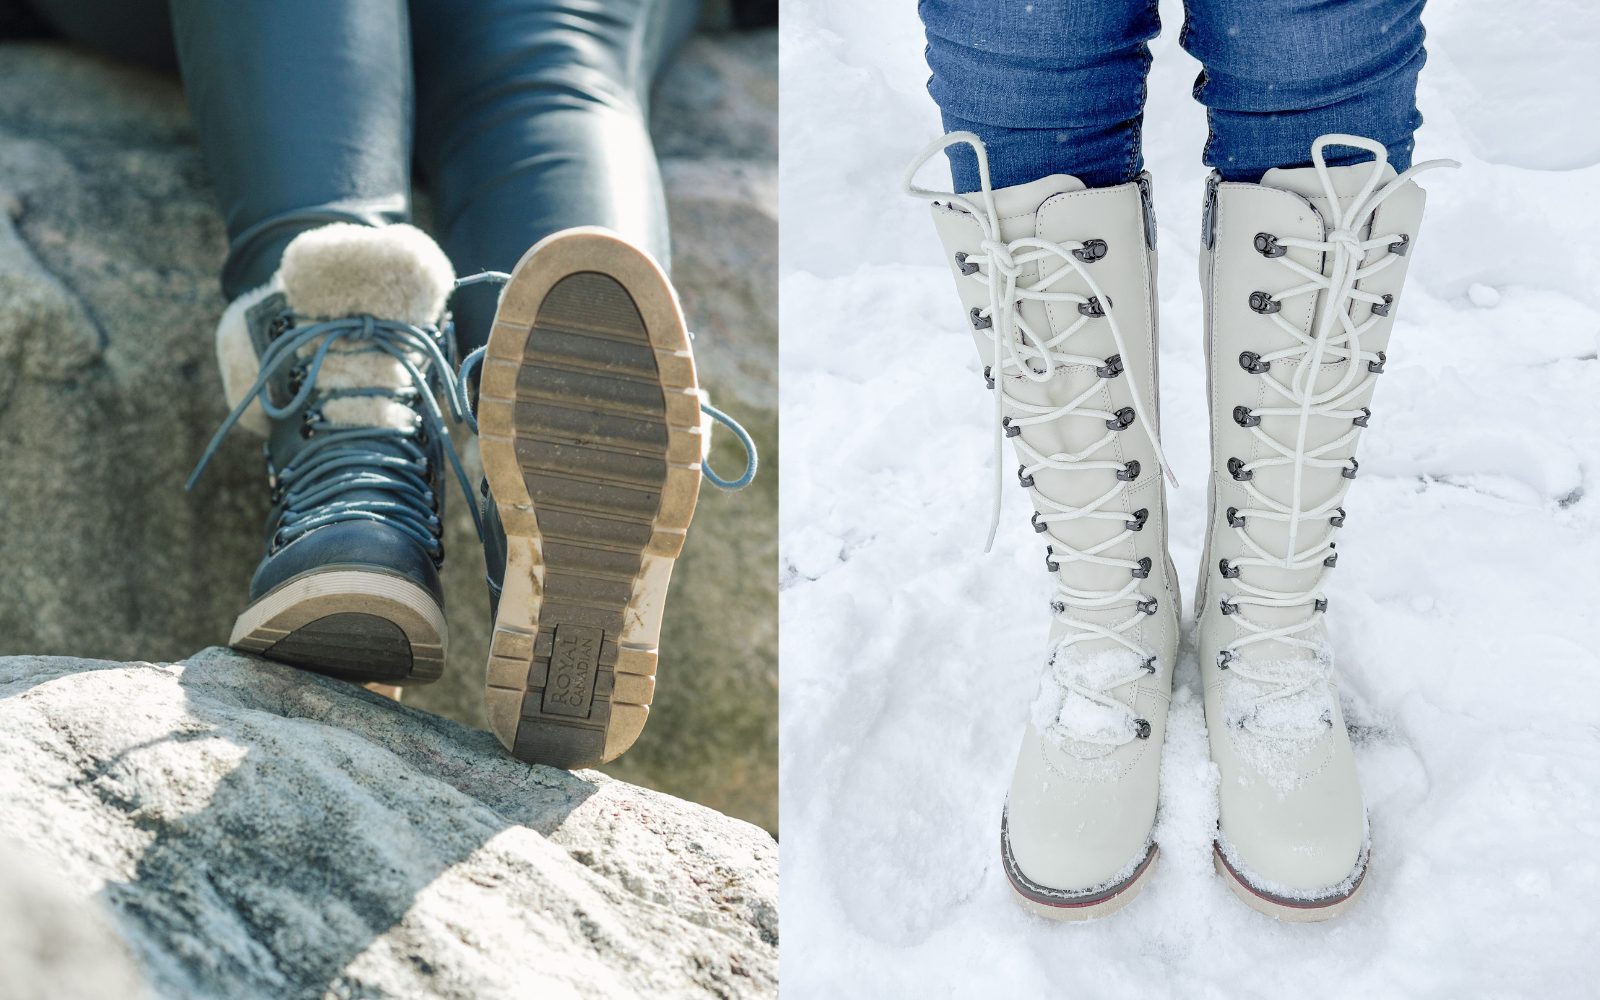 The image is divided into two halves vertically. The left side represents Waterproof boots and the right side represents Water-resistant boots. Striding Forward with the Right Protection.